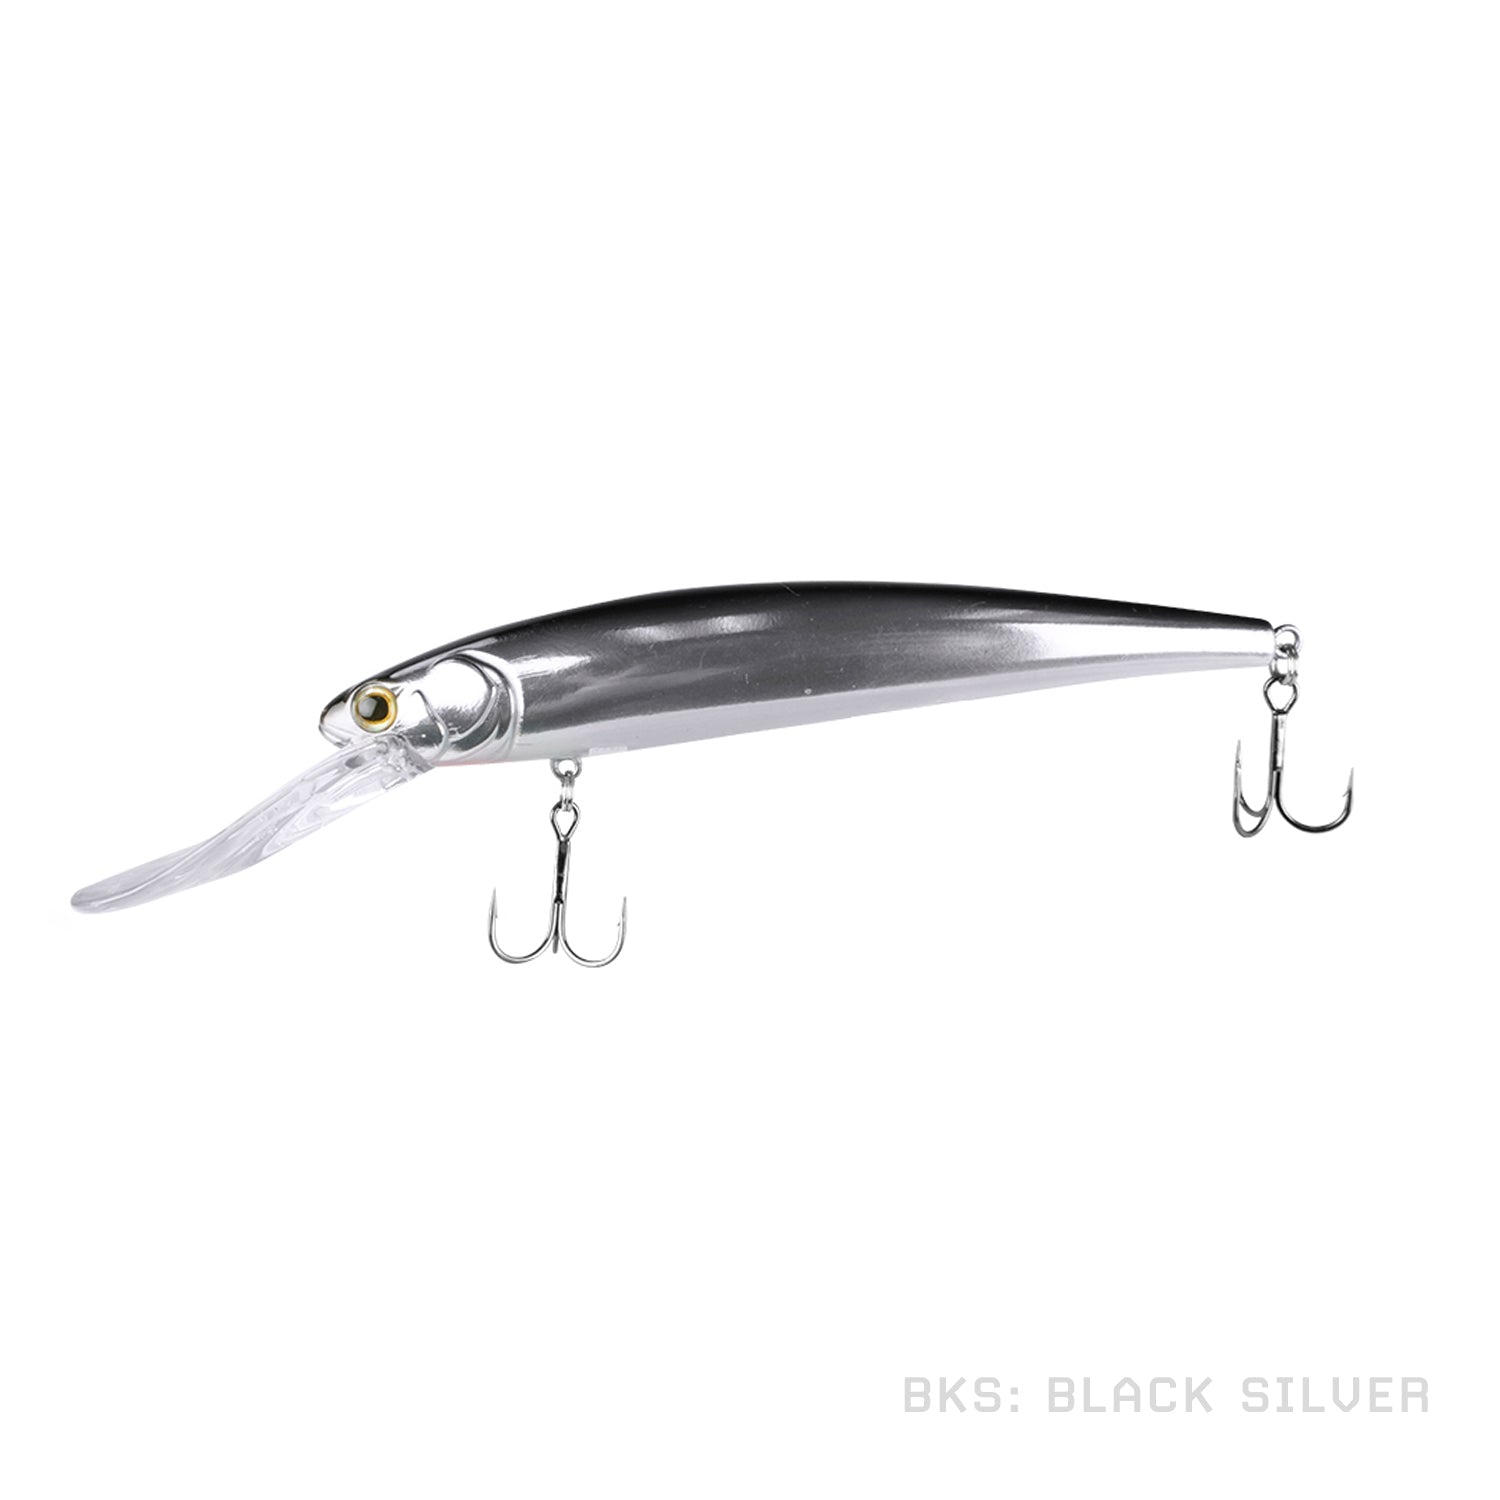 BLUEWING Deep Diving Lures Deep Dive Trolling Lure 3D Diving Minnow  Jerkbait Lure with Hook Saltwater Fishing Lures 230mm/9.05in SBM 